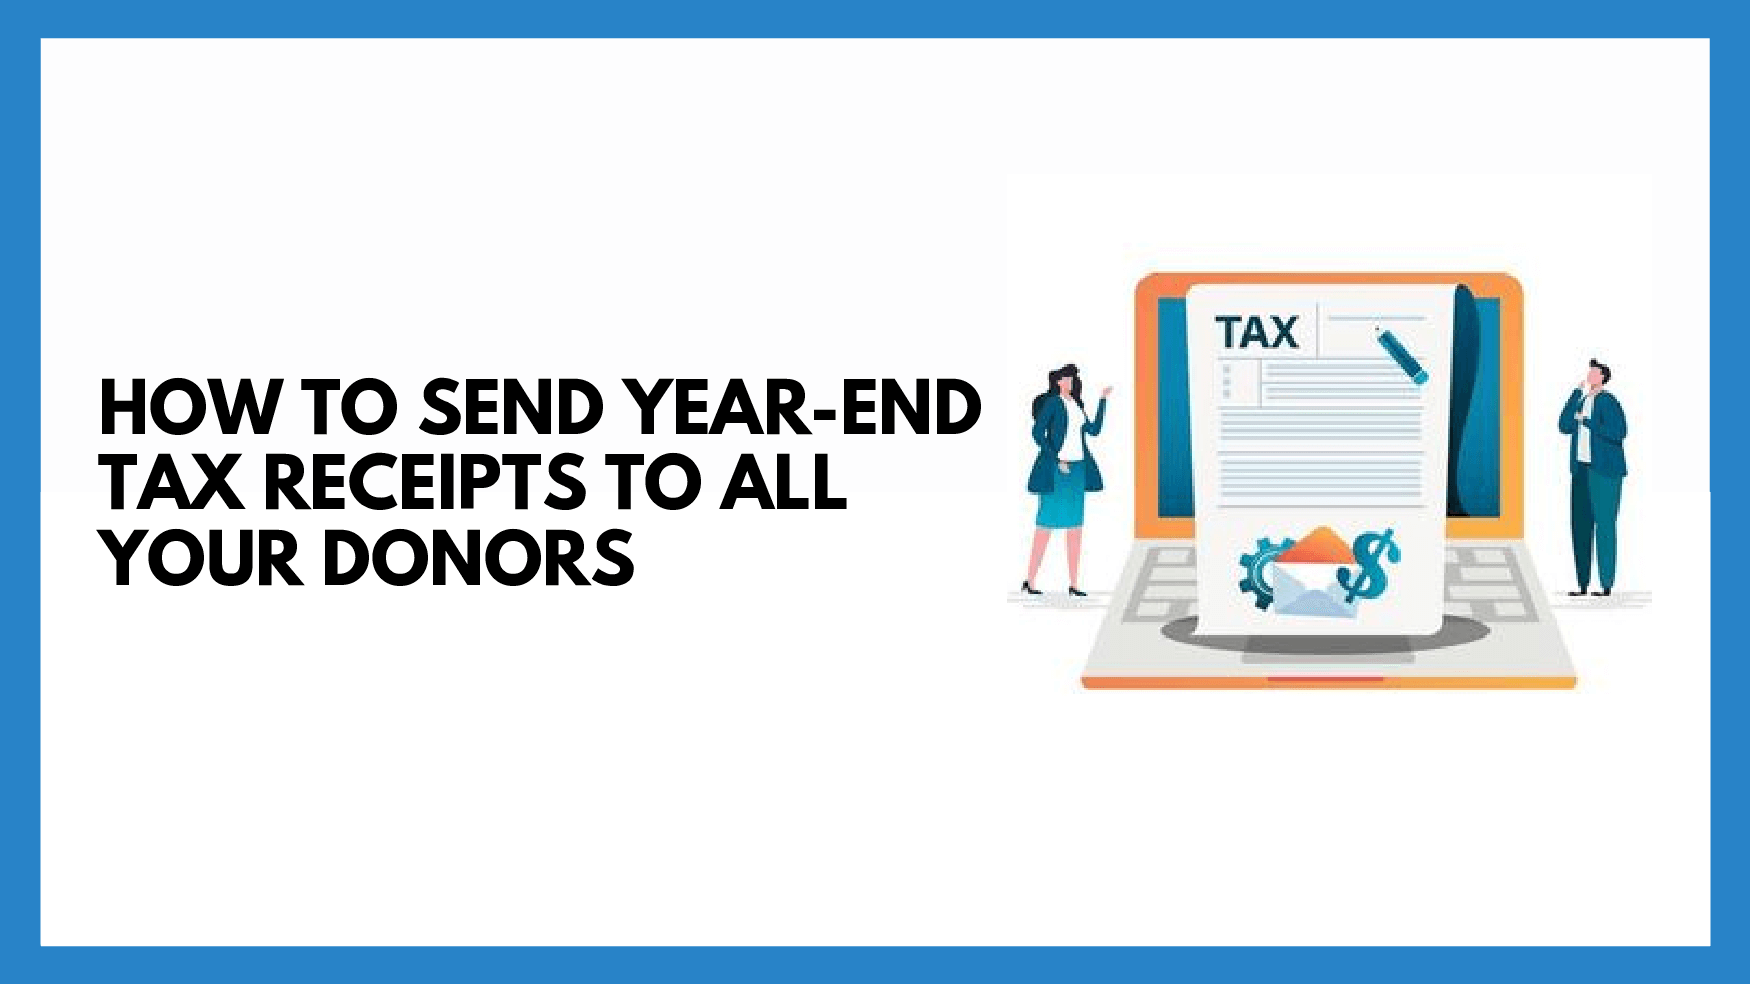 How To Send Year-end Tax Receipts to All Your Donors